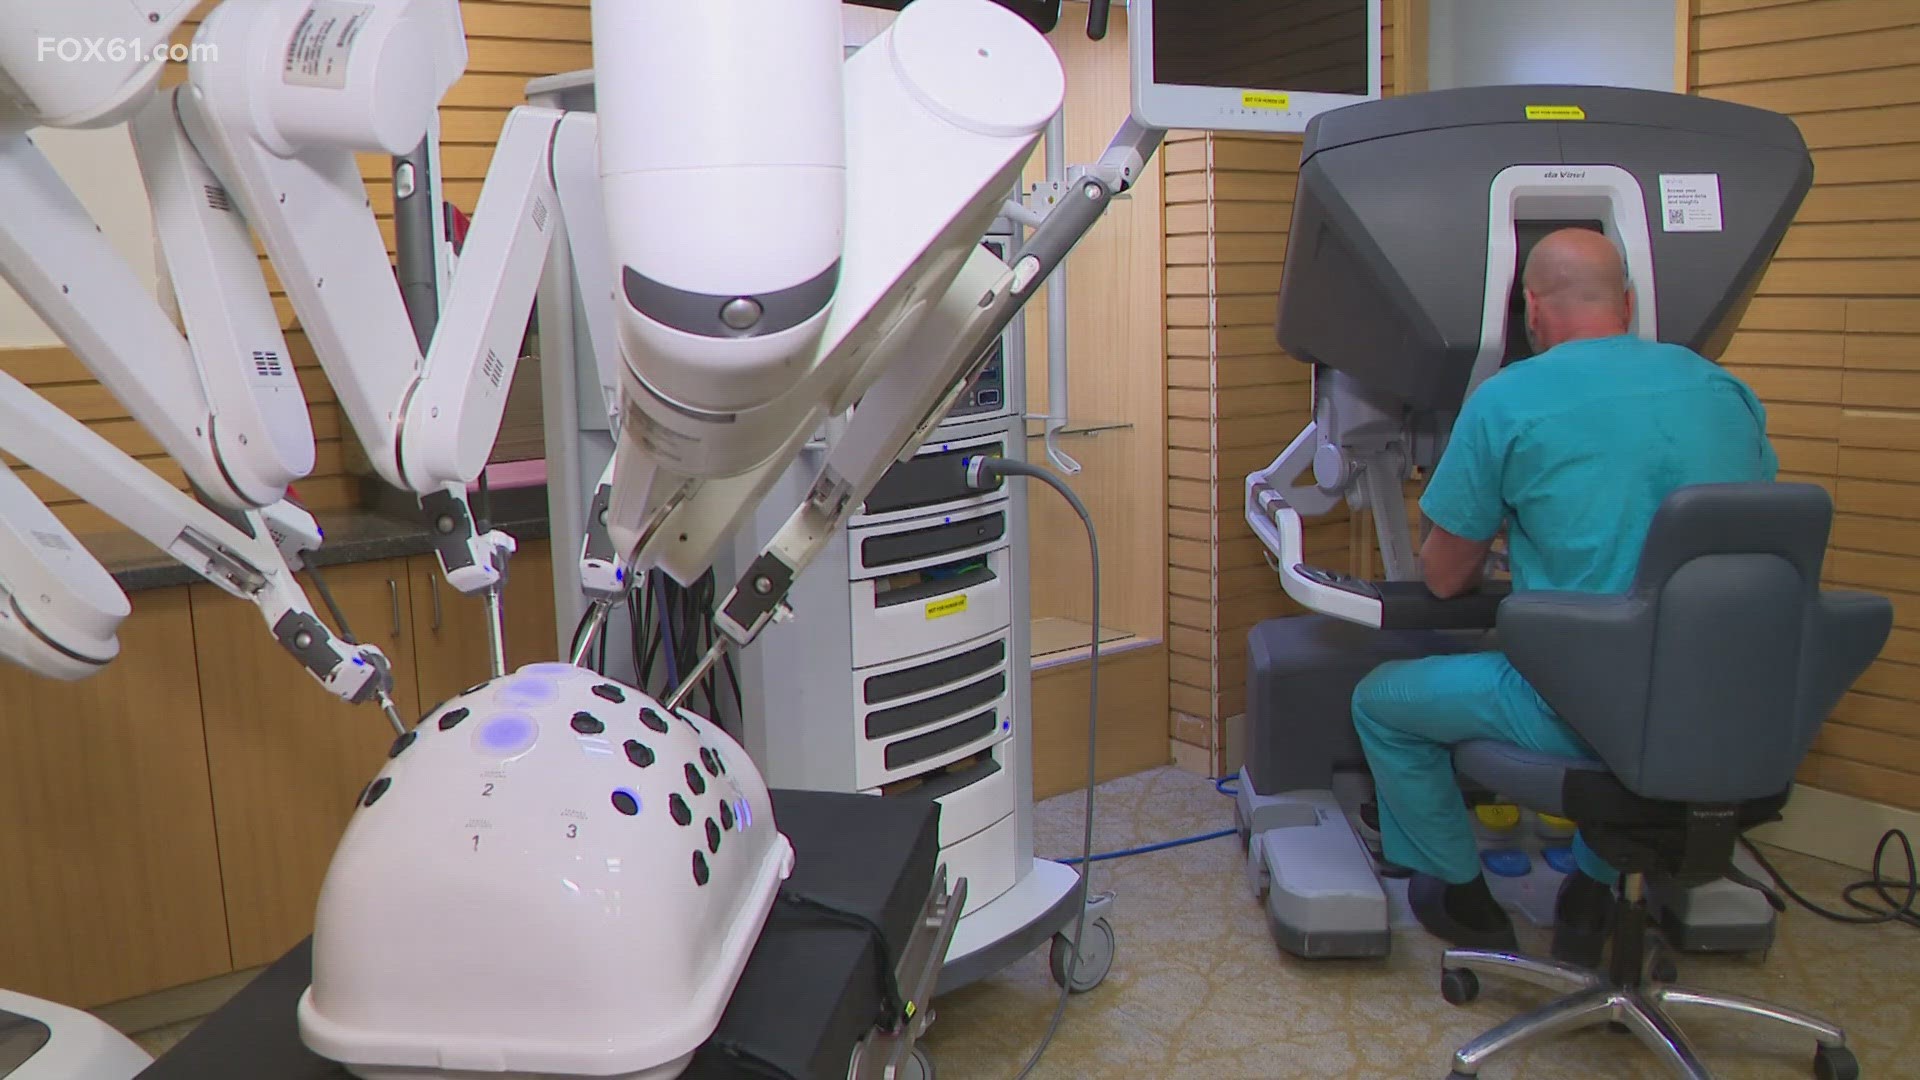 The latest “da Vinci” surgical system comes to Saint Mary’s Hospital.